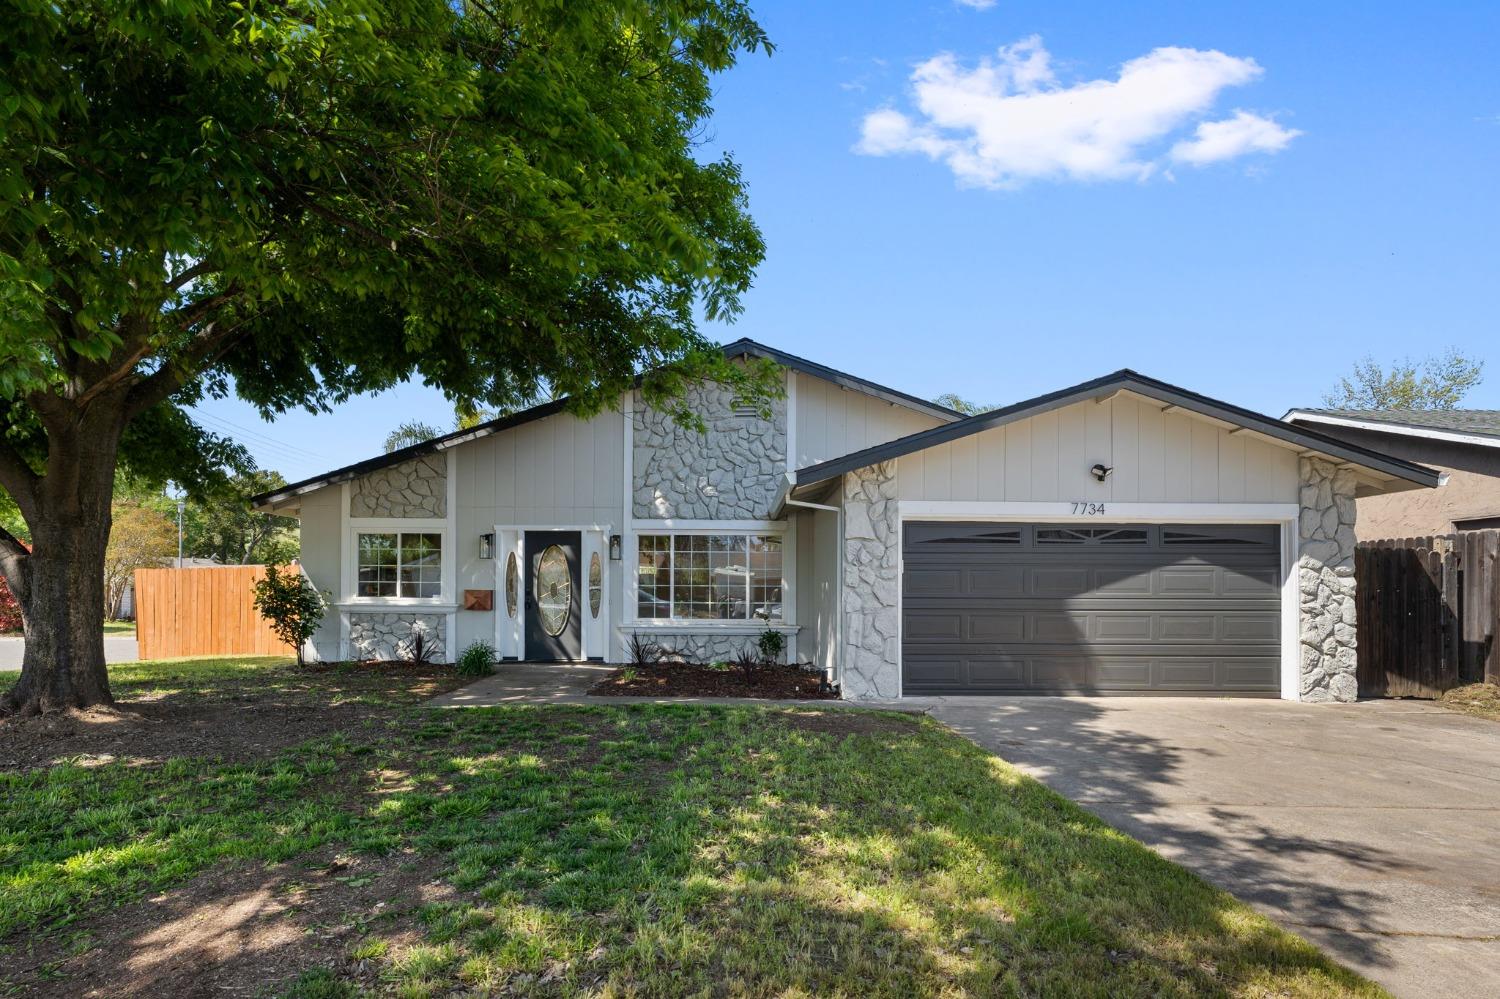 Photo of 7734 Lialana Wy in Citrus Heights, CA